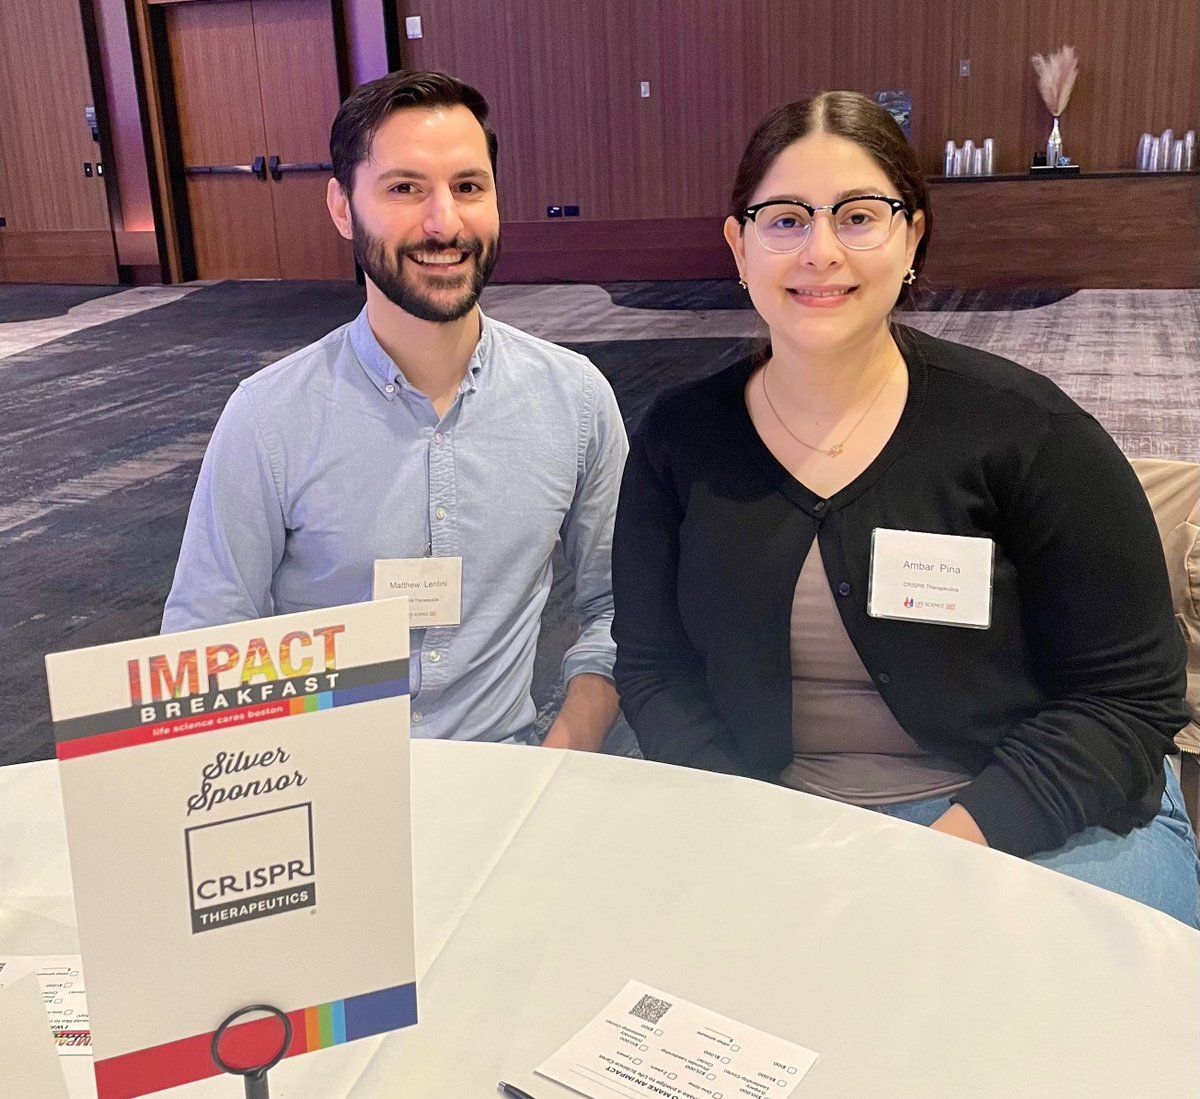 We had the honor of attending the @LS_Cares Impact Breakfast earlier this week. We’re proud to support their efforts in making a positive impact on our local community by volunteering and raising awareness about poverty and inequality. #CRISPRTX